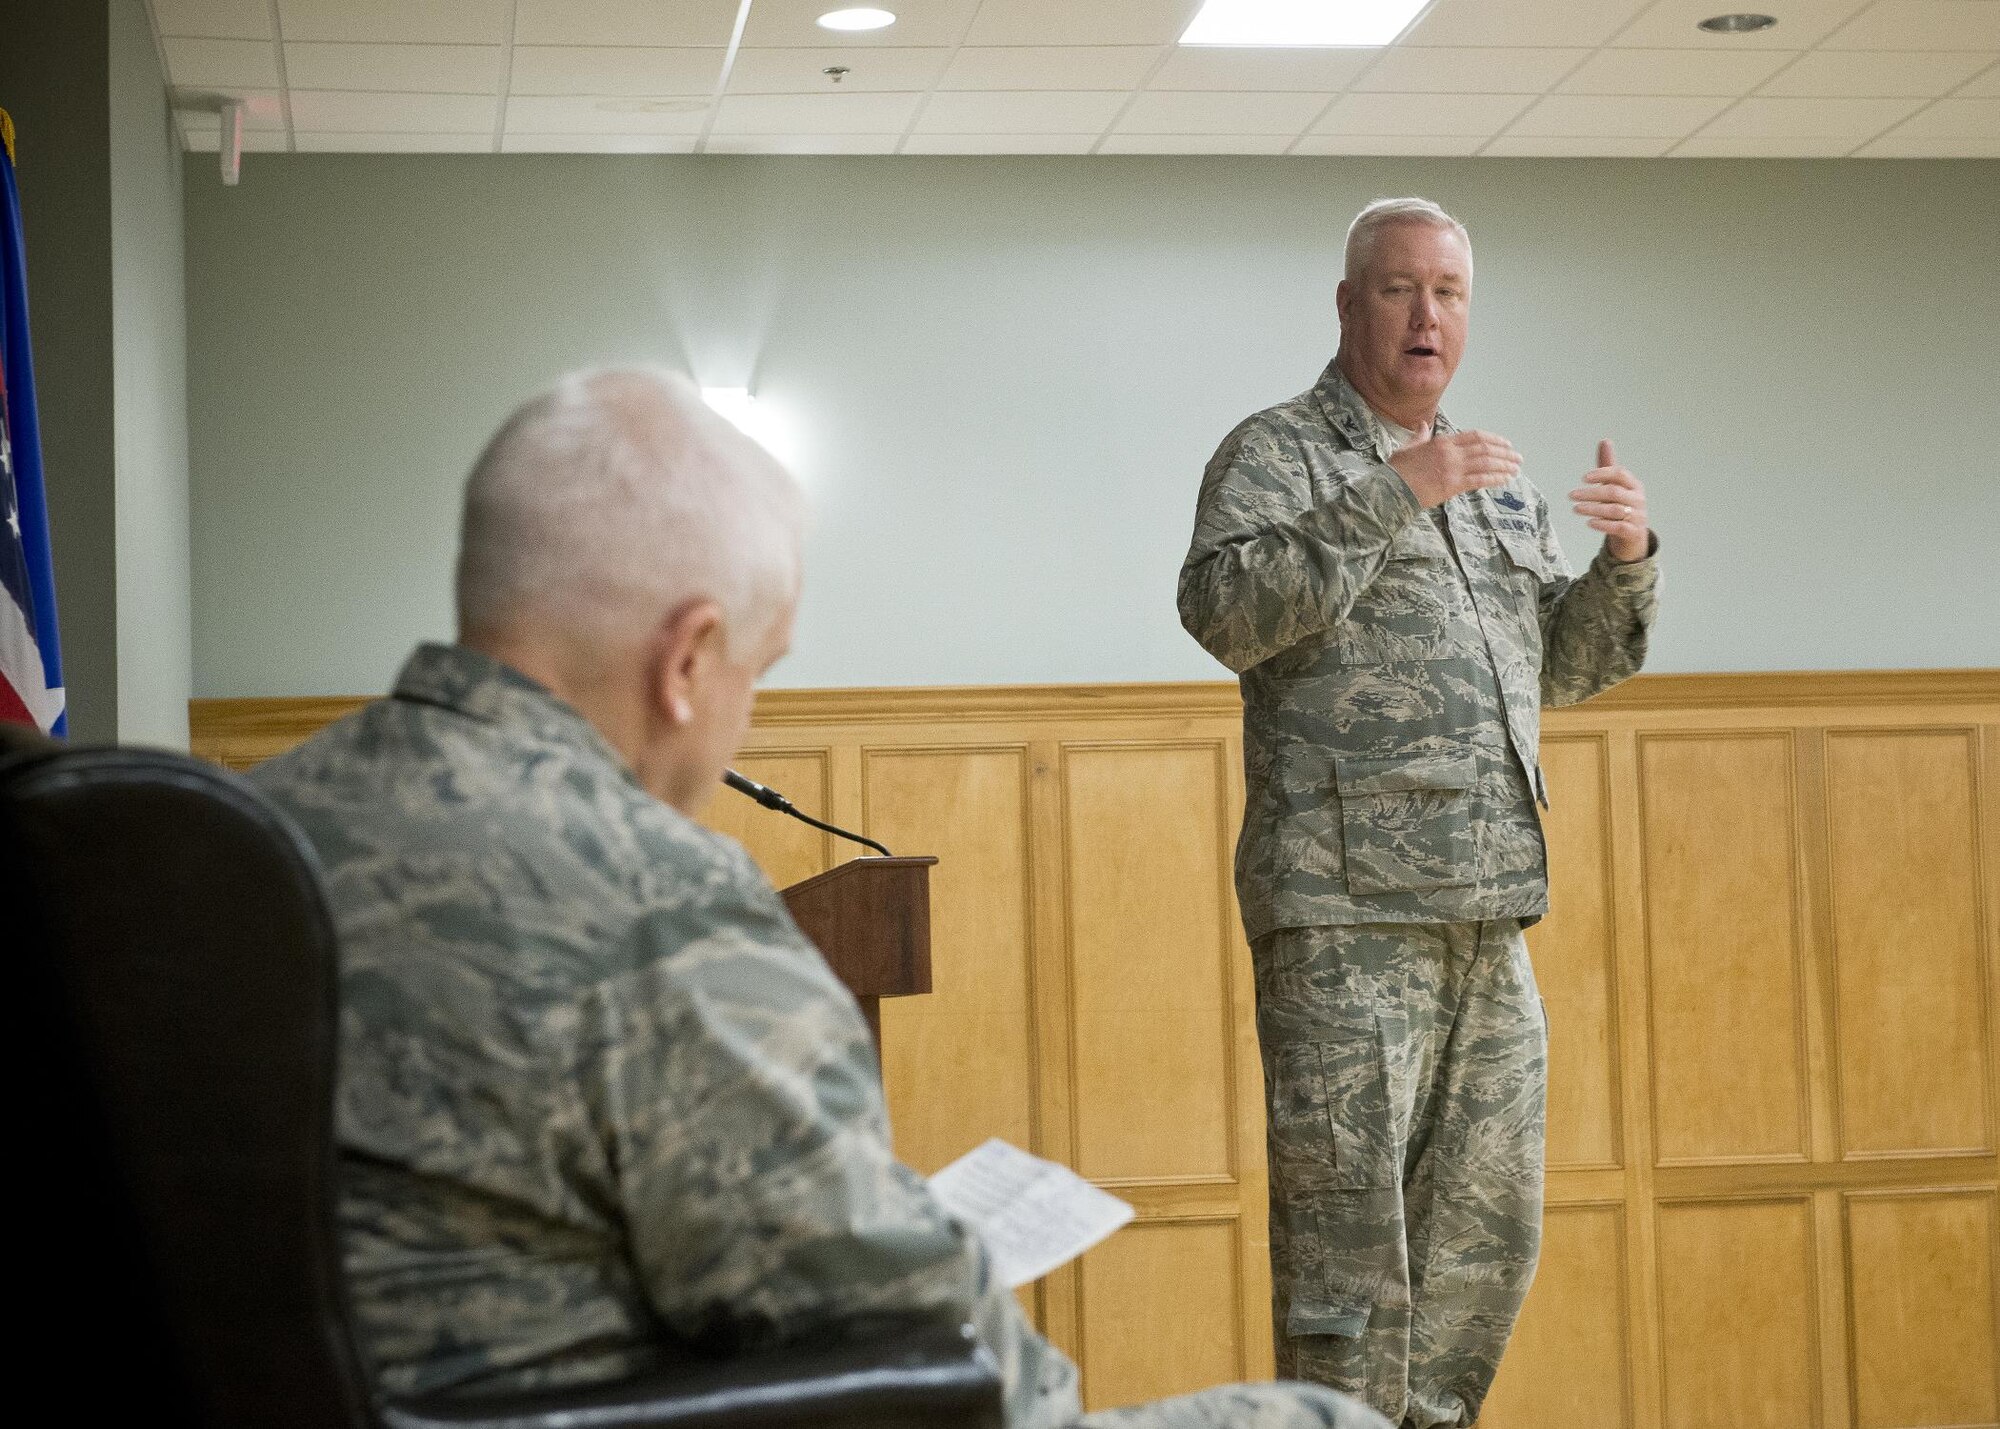 Col. Robert A. Ator II, 189th Airlift Wing commander, delivers remarks during a graduation ceremony for the first class of the Air Force's Cyber Skills Validation Course held March 29, 2017, at Little Rock Air Force Base, Arkansas. The course is designed to take ANG Airmen with preexisting cyber skills and accelerate their training in the Cyber Warfare career field. (U.S. Air National Guard photo by Master Sgt. Marvin R. Preston)